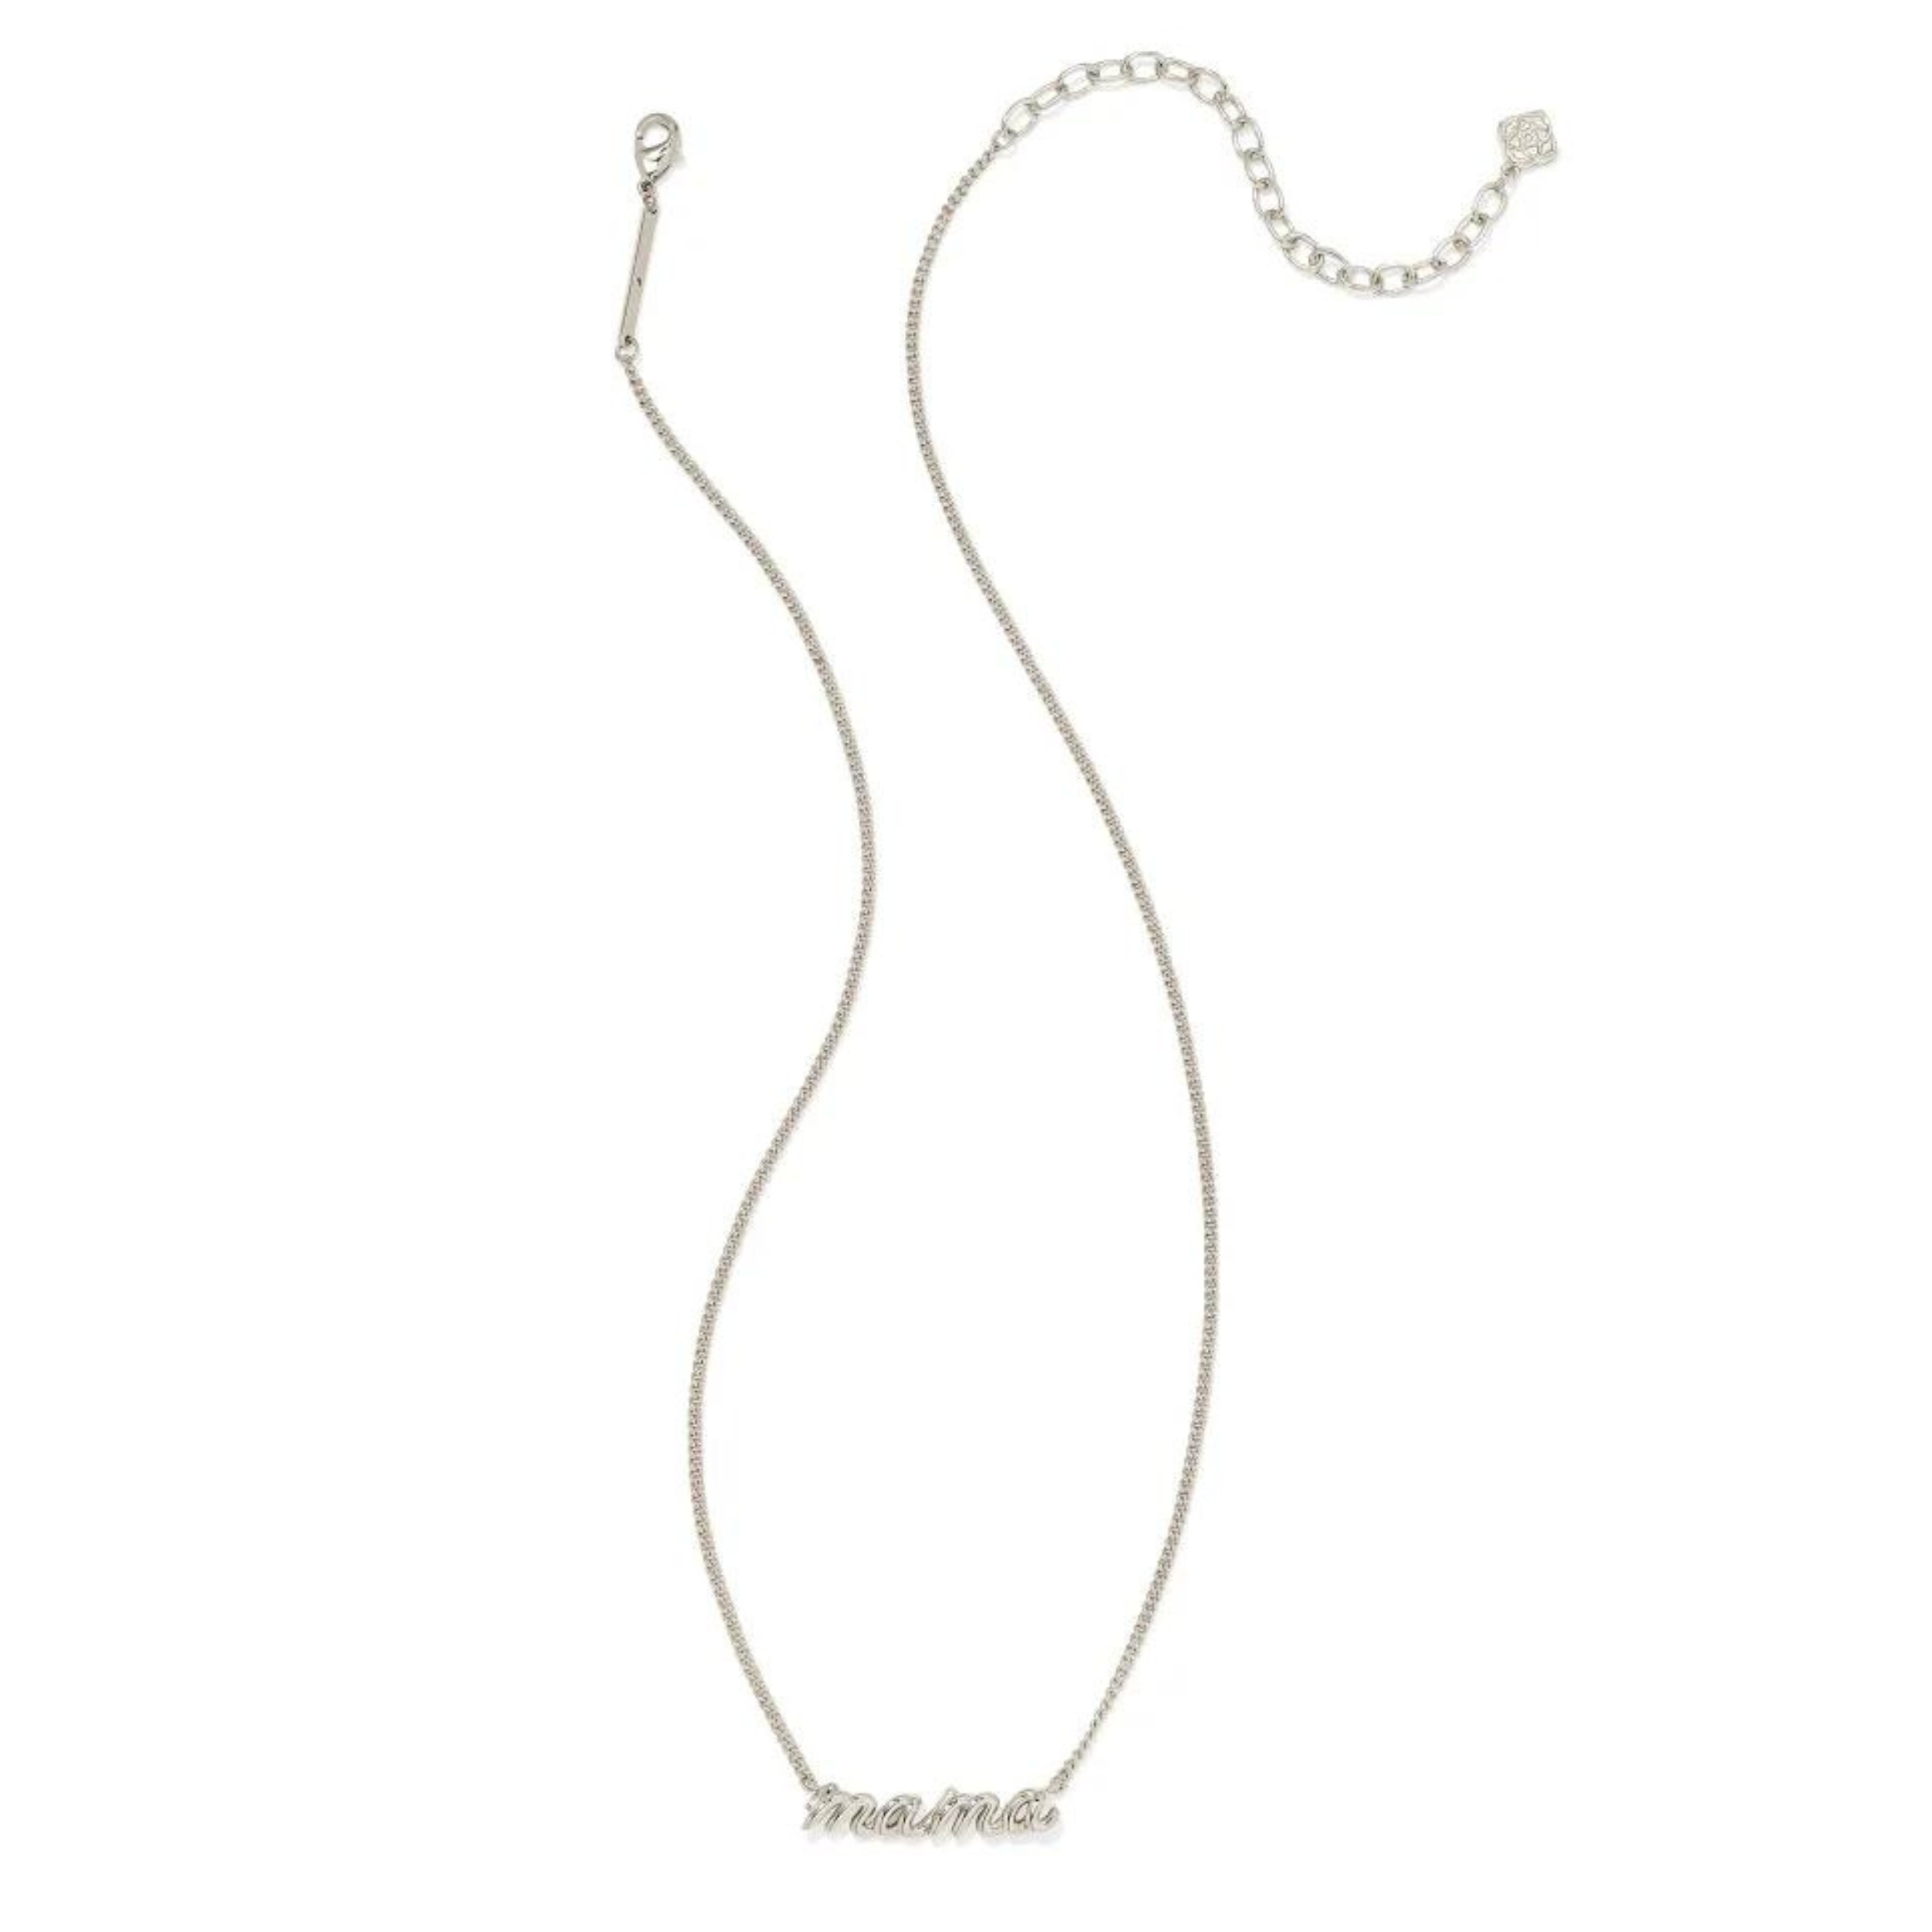 Kendra Scott | Mama Script Pendant Necklace in Silver - Giddy Up Glamour Boutique